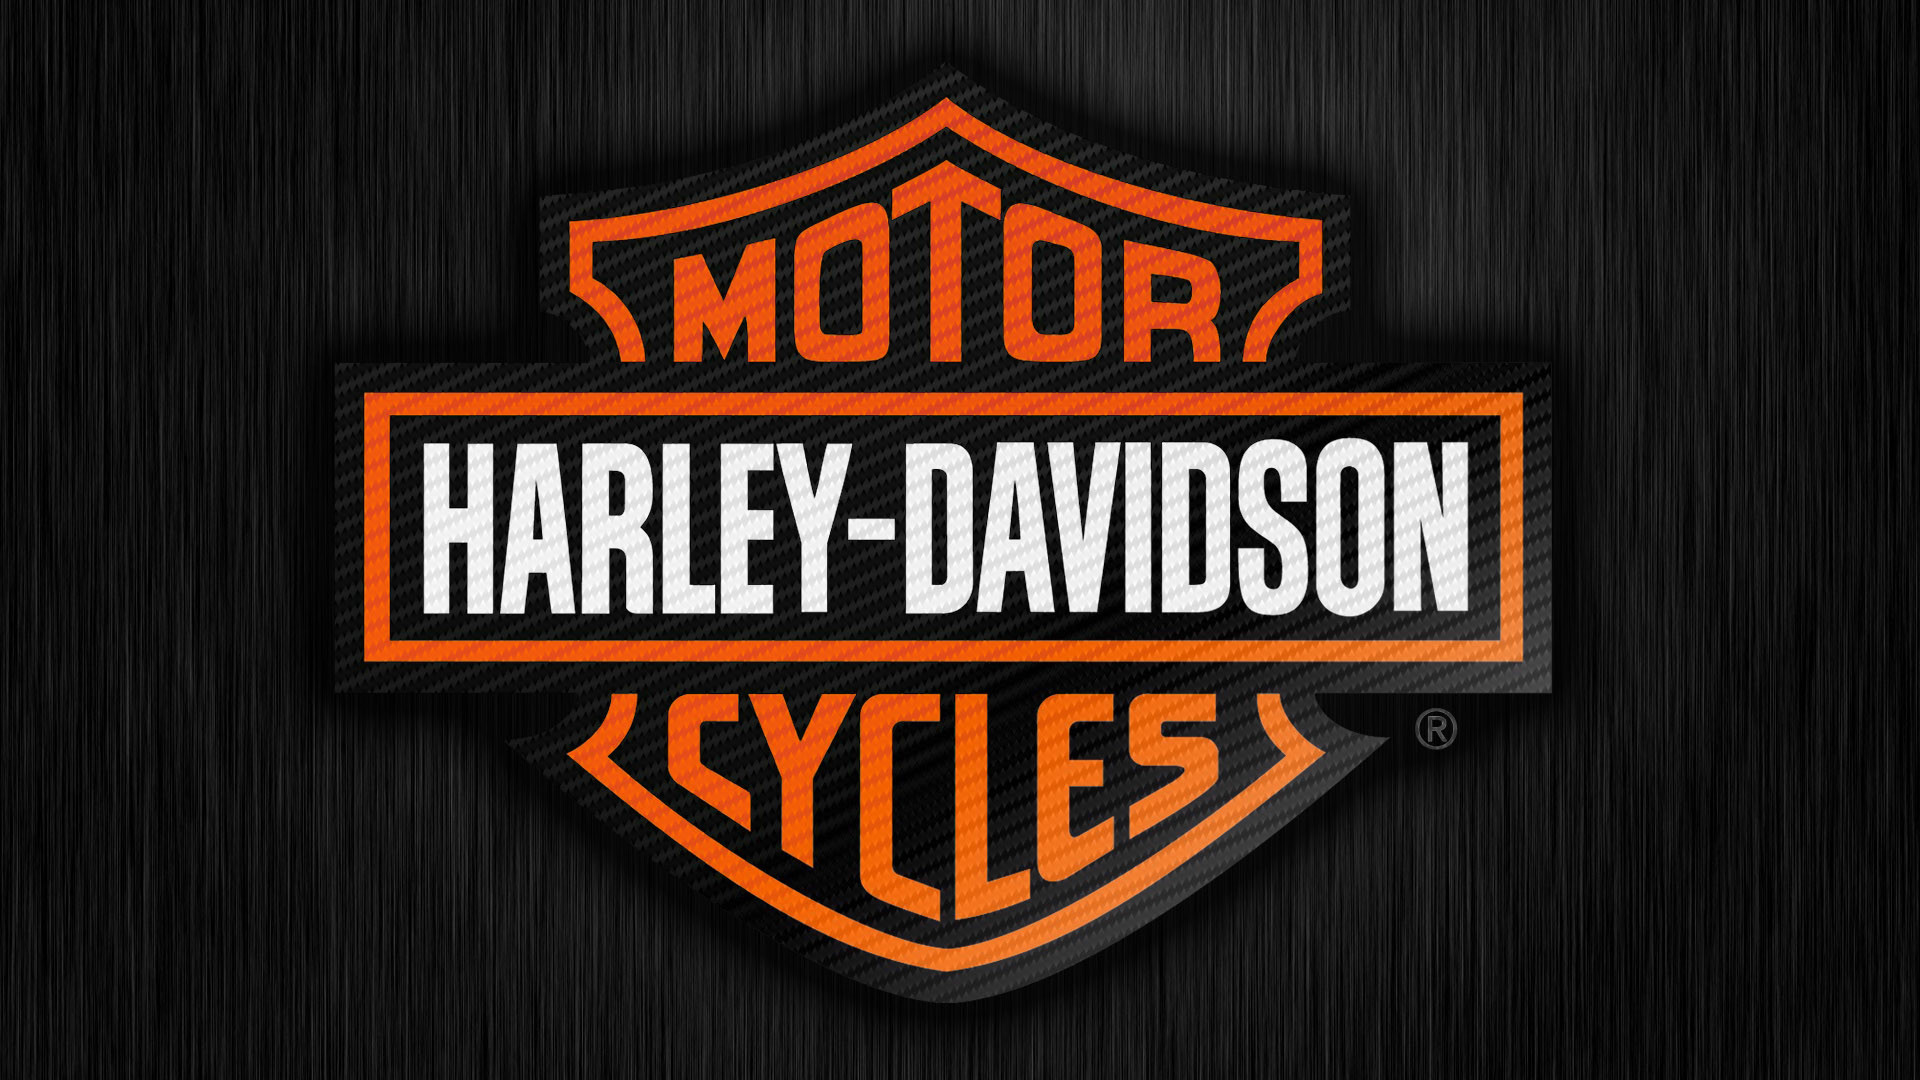 1920x1080 Related Wallpapers from Aston Martin. Harley Davidson Logo